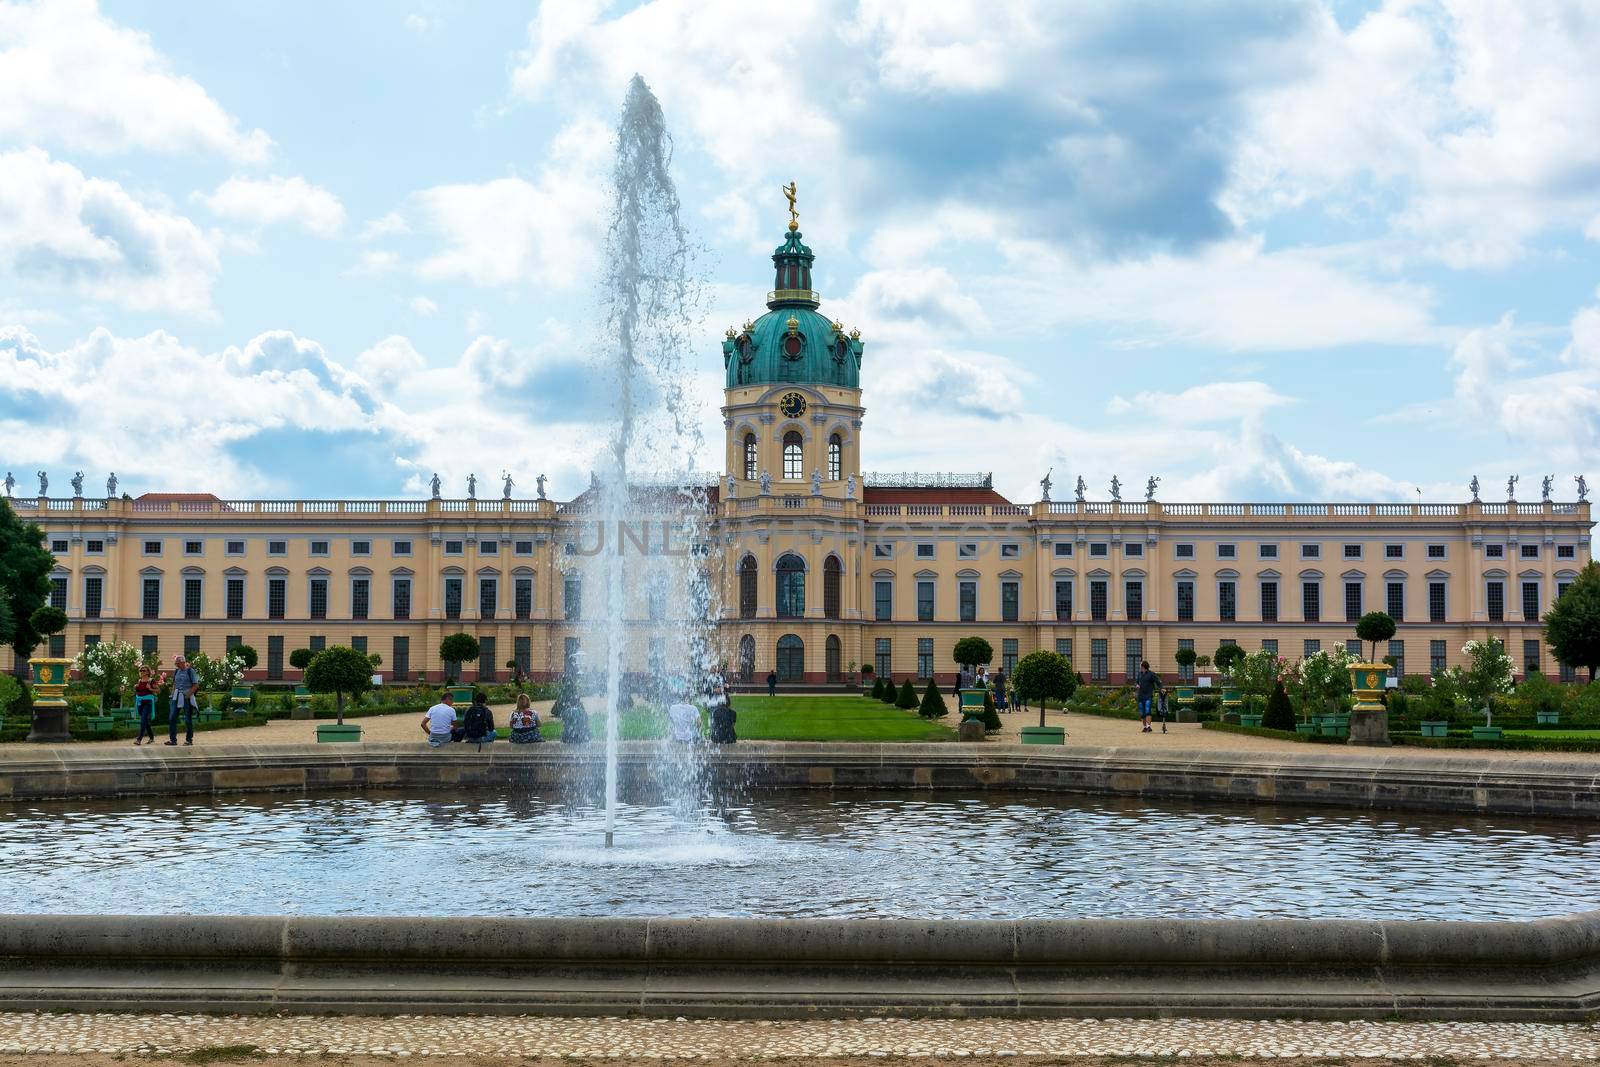 Charlottenburg palace and garden in Berlin, Germany by ankarb